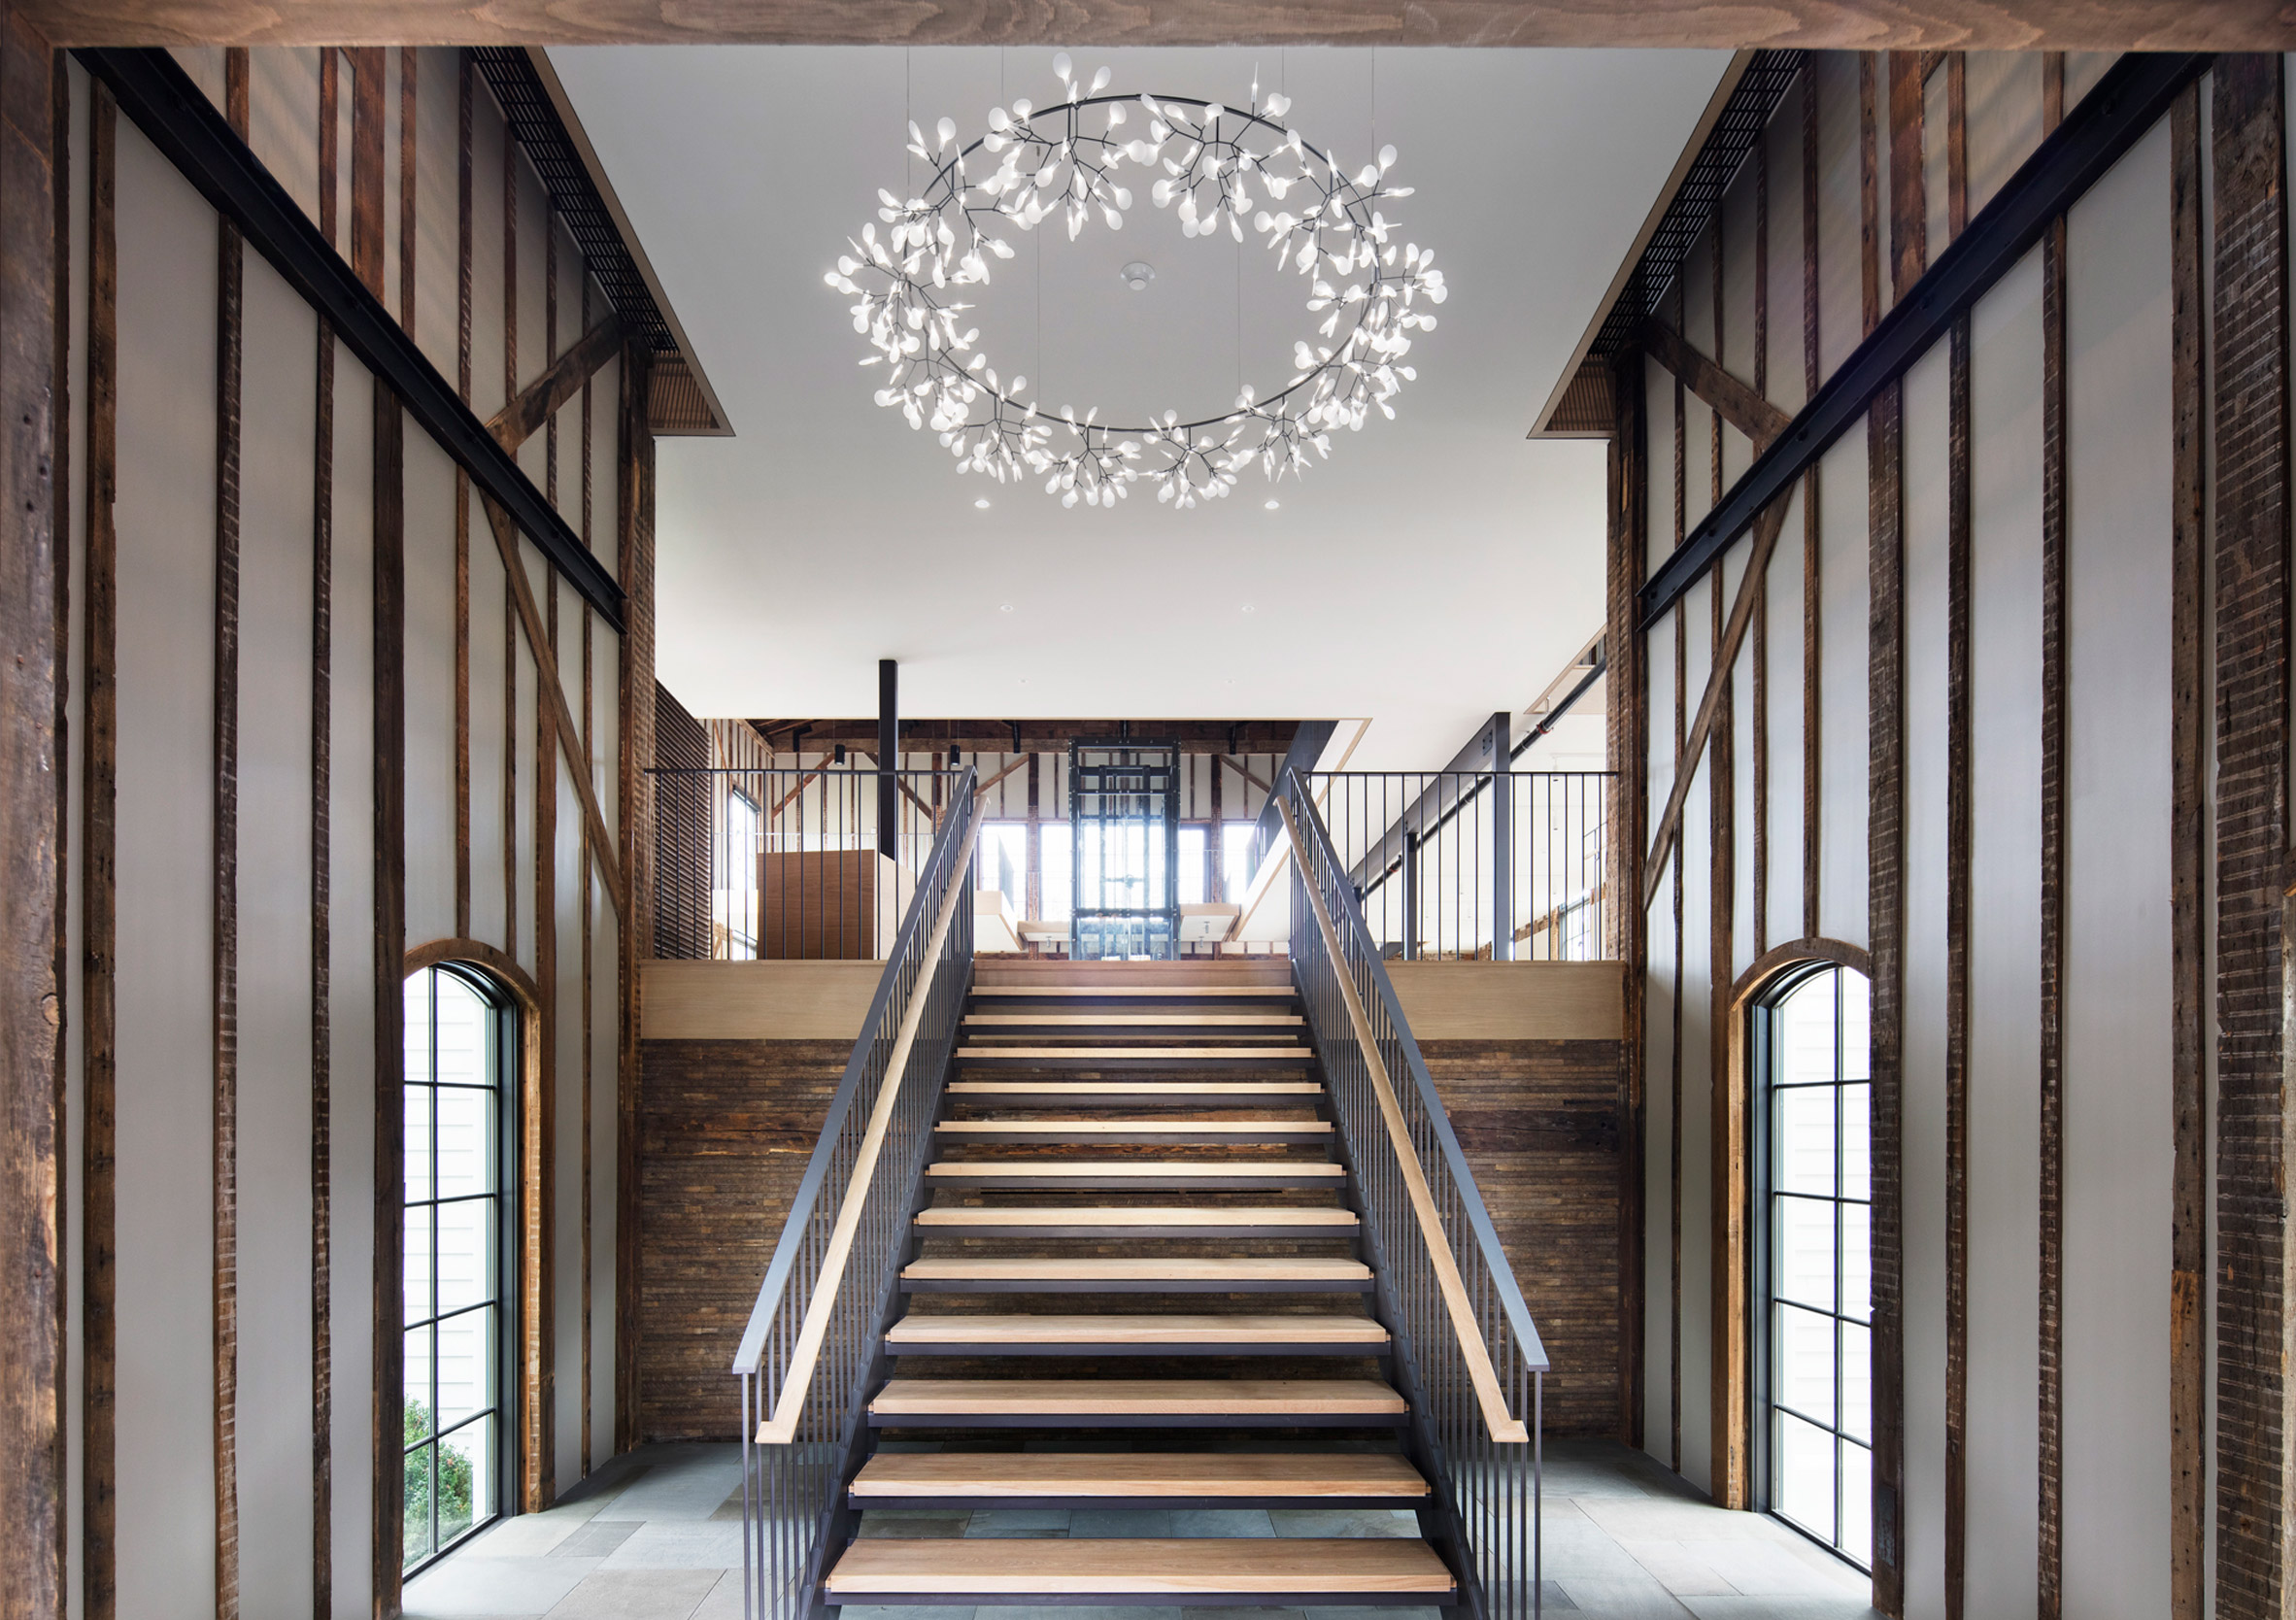 Staircase of church project by Skolnick Architecture and Design Partnership